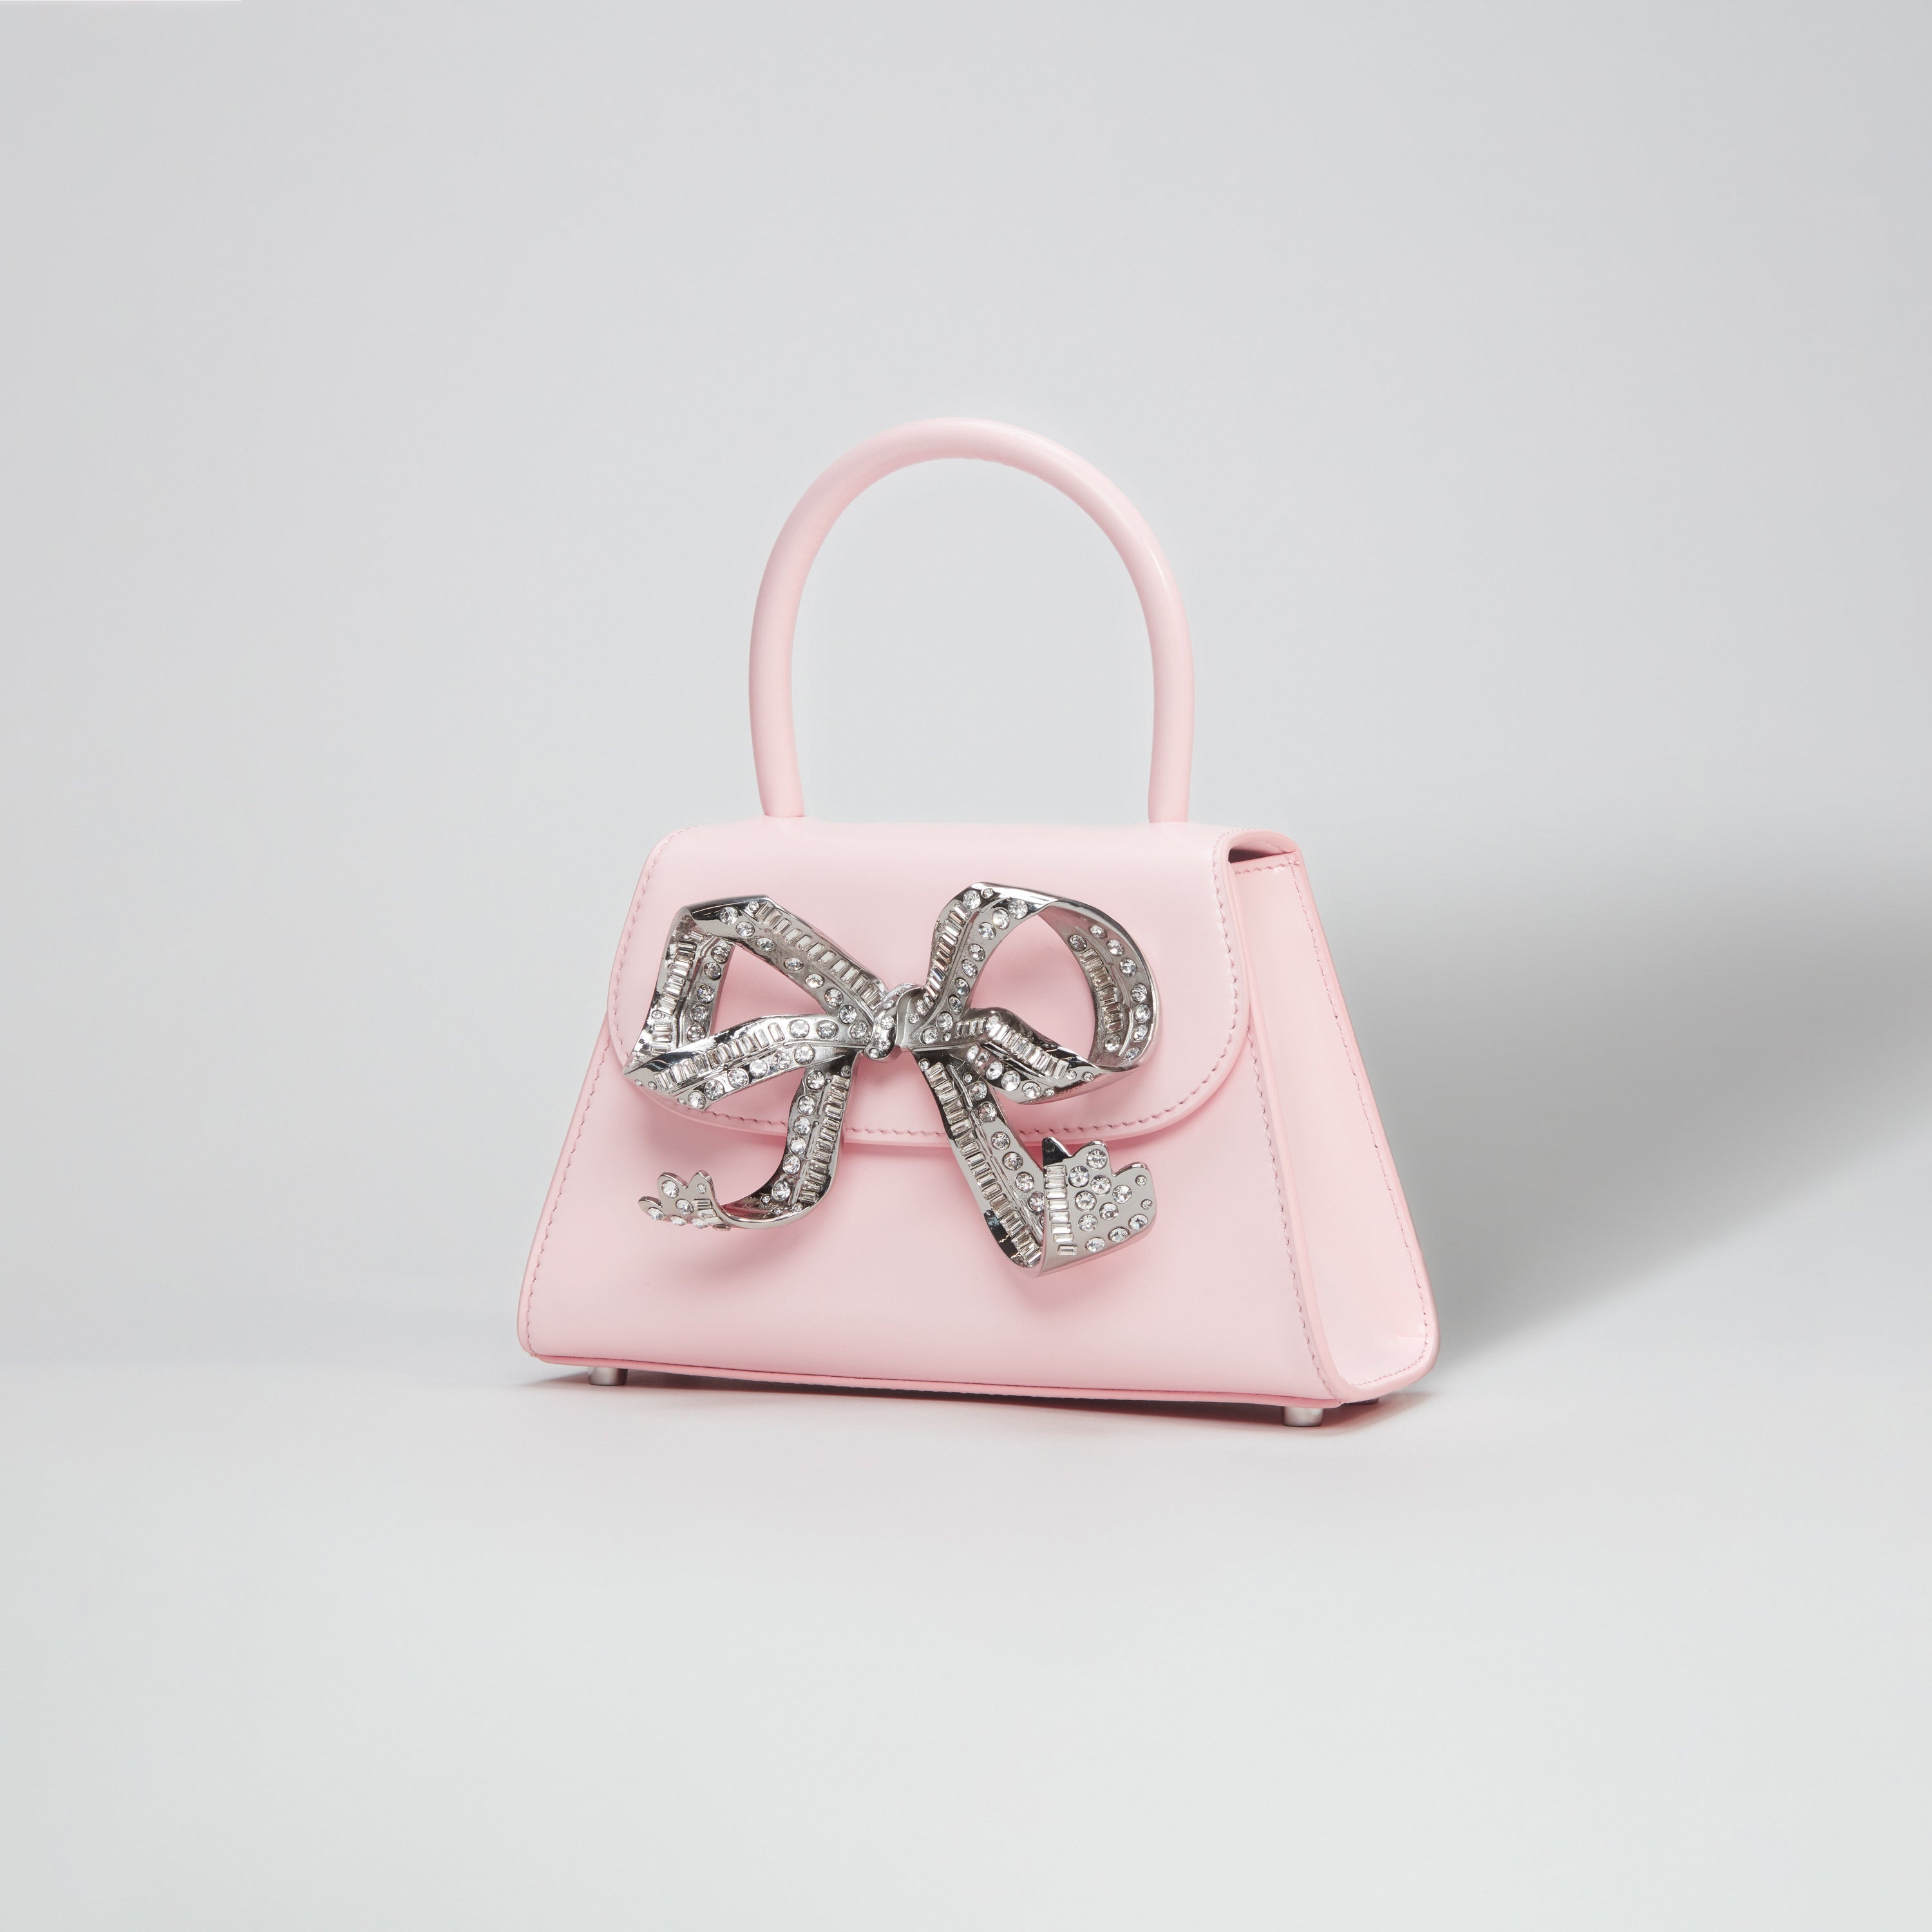 The Bow Mini in Pink with Diamanté - 2